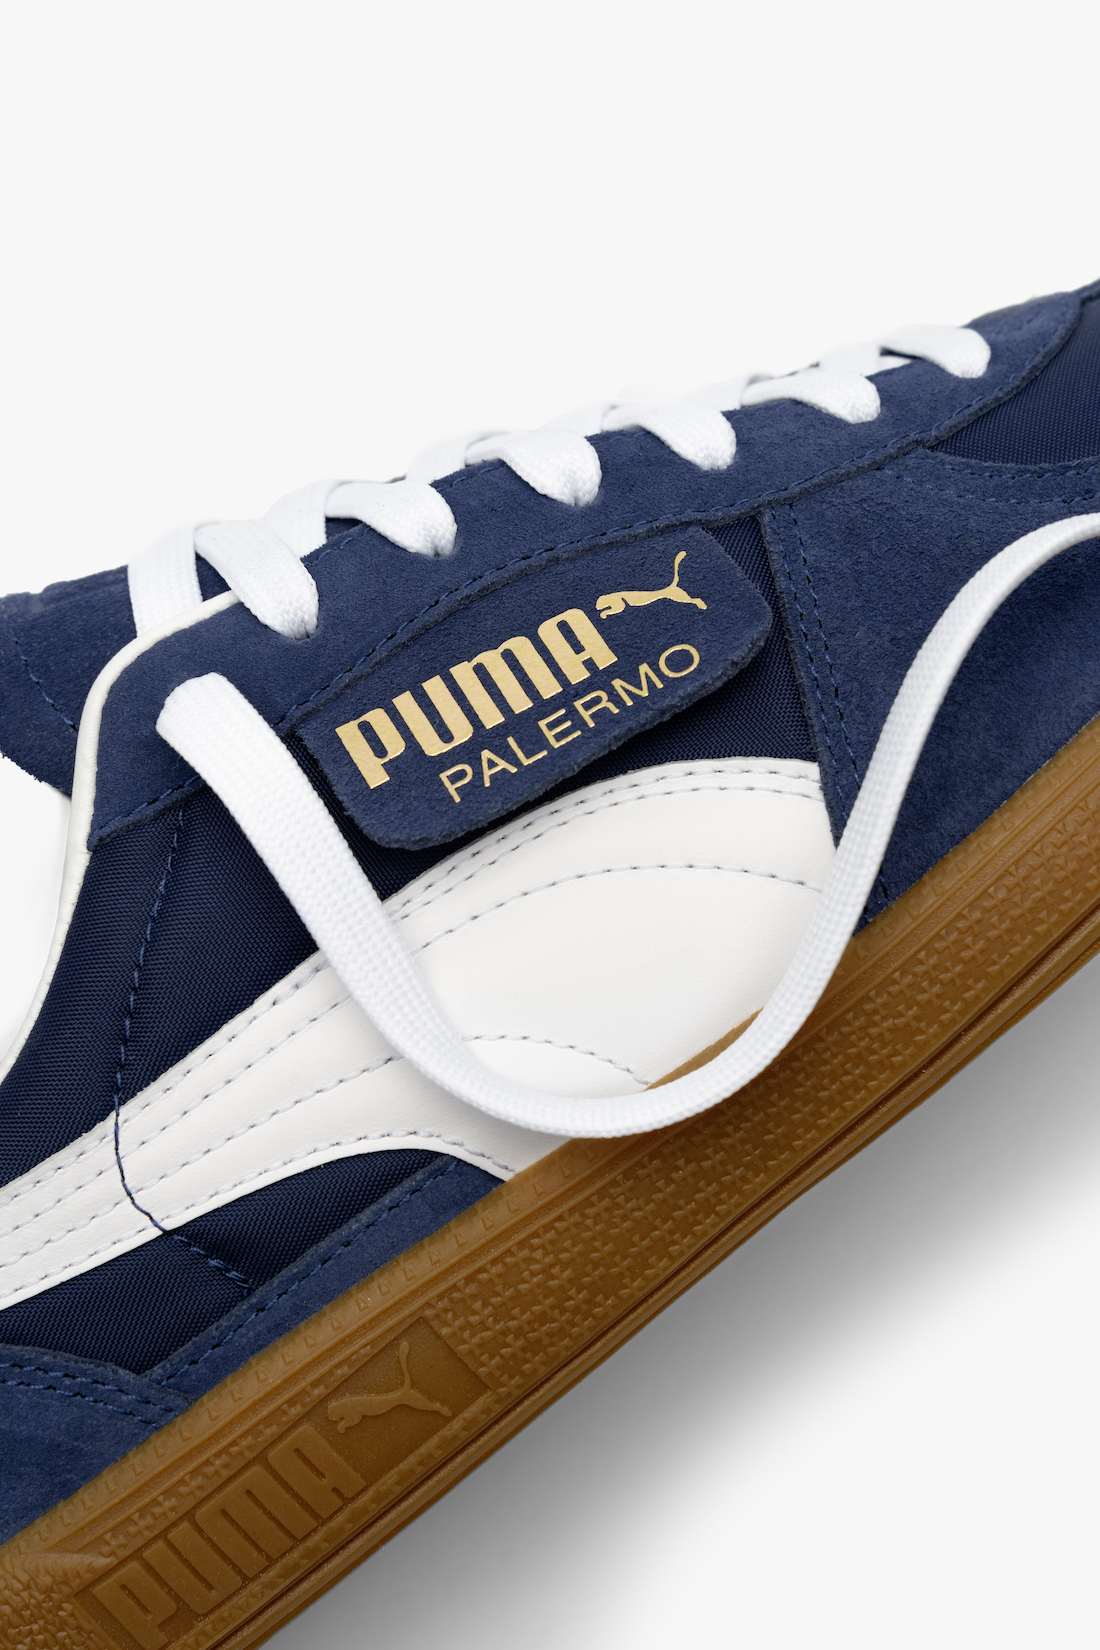 PUMA Revives Iconic Palermo Sneaker from the Archives | Sneakers Cartel